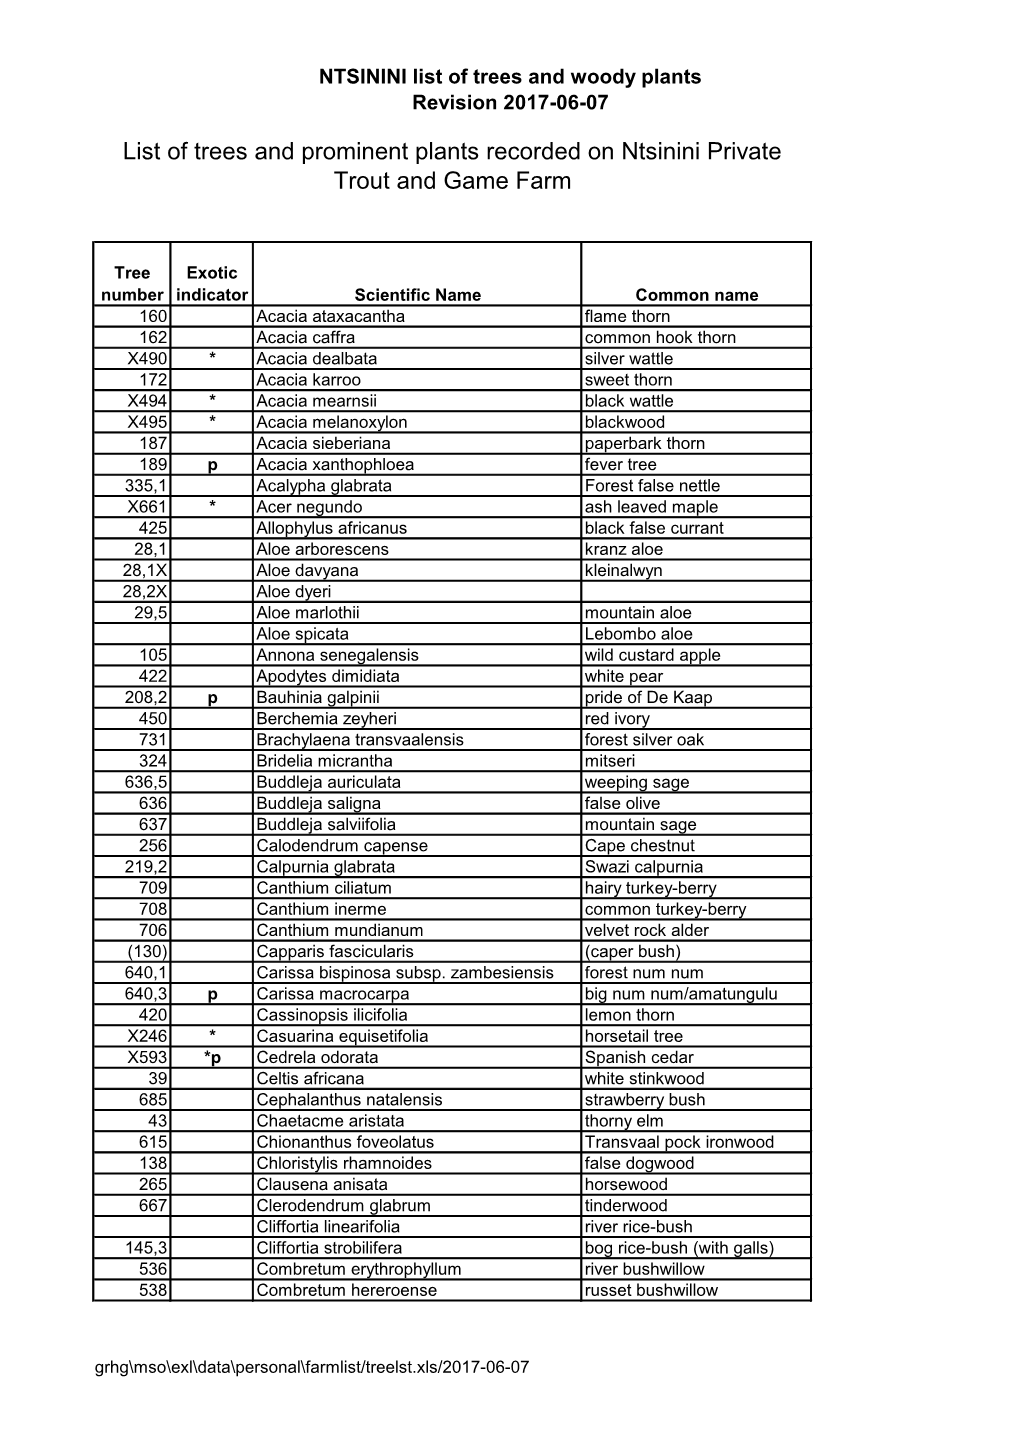 List of Trees and Prominent Plants Recorded on Ntsinini Private Trout and Game Farm